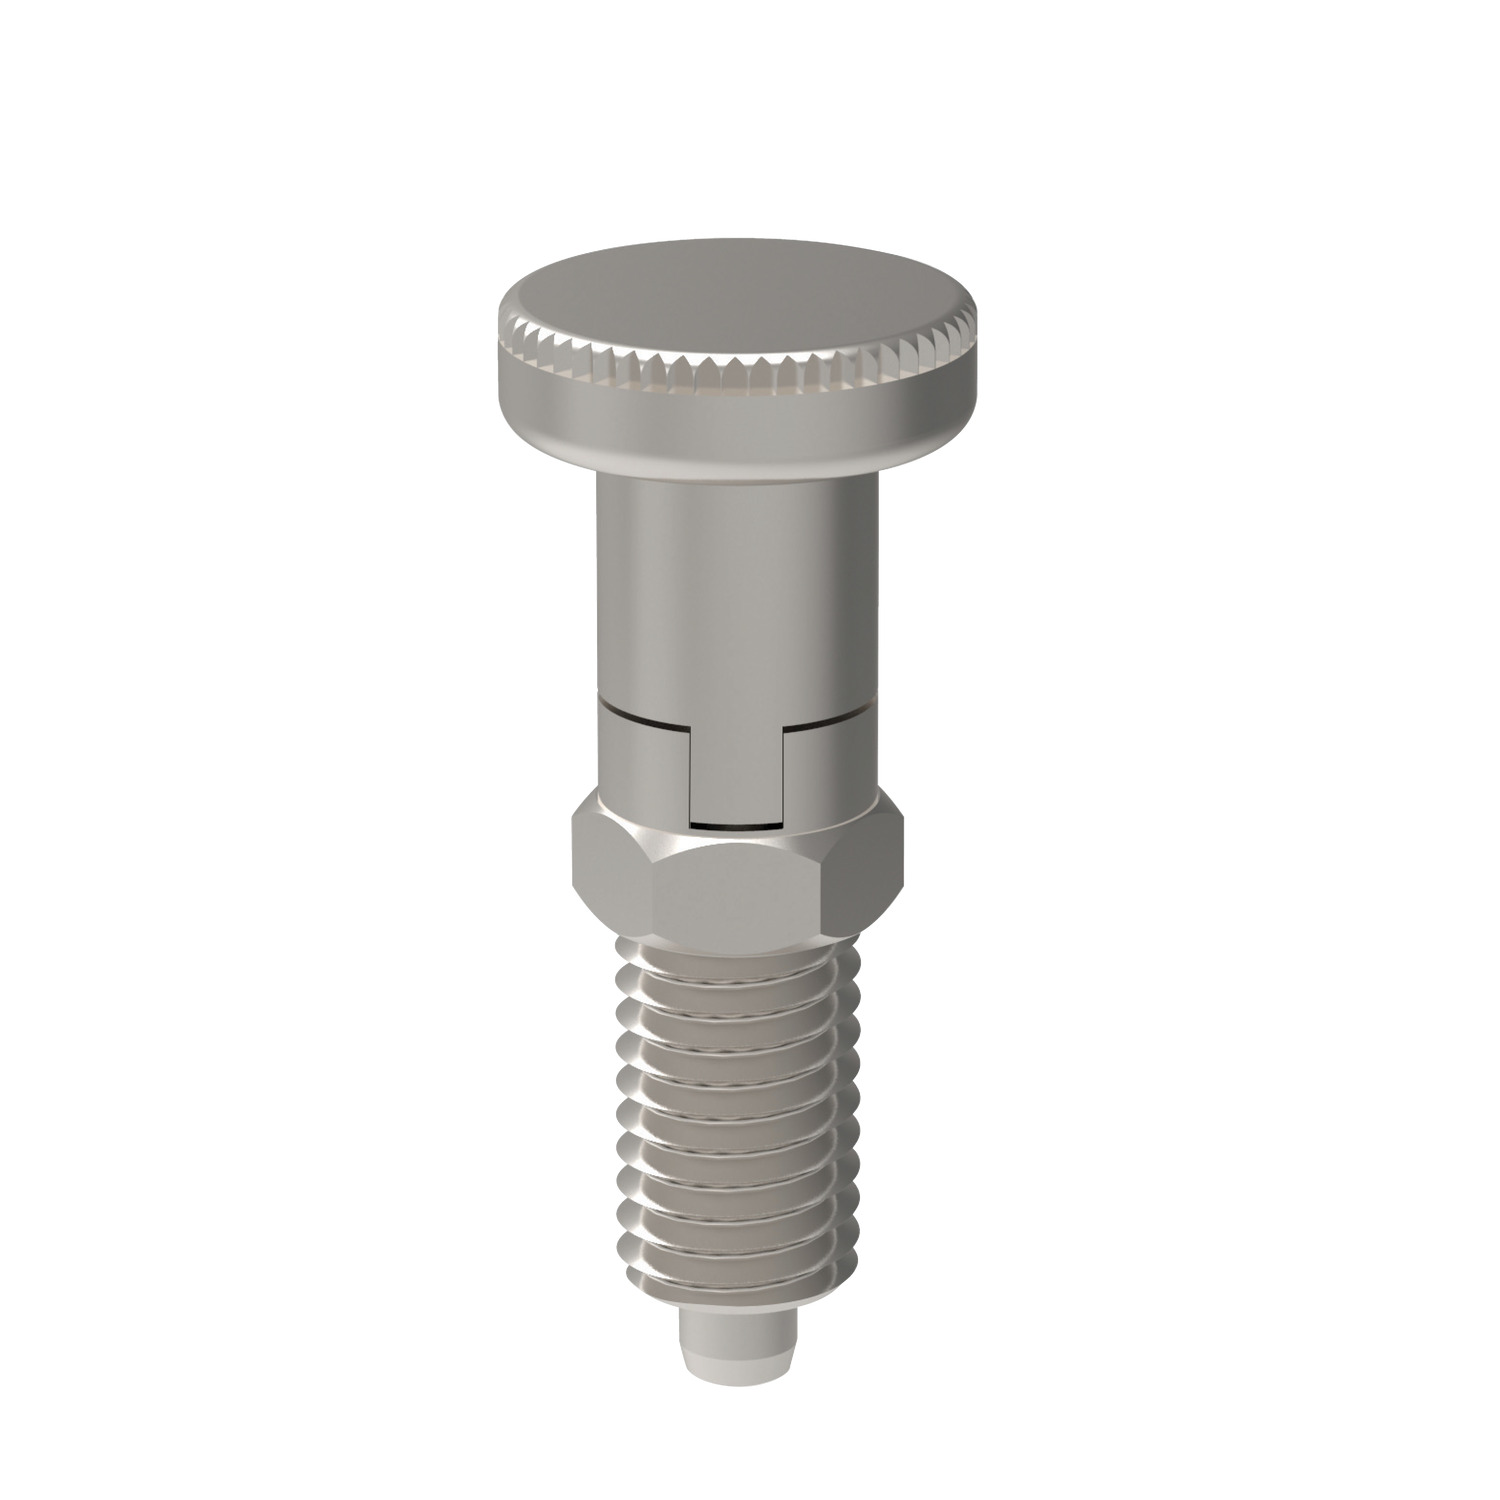 Index Plunger - Pull Grip Complete stainless steel construction designed with specific demands of food processing, pharmaceutical and water treatment industries in mind, The specific range comes with a locking.